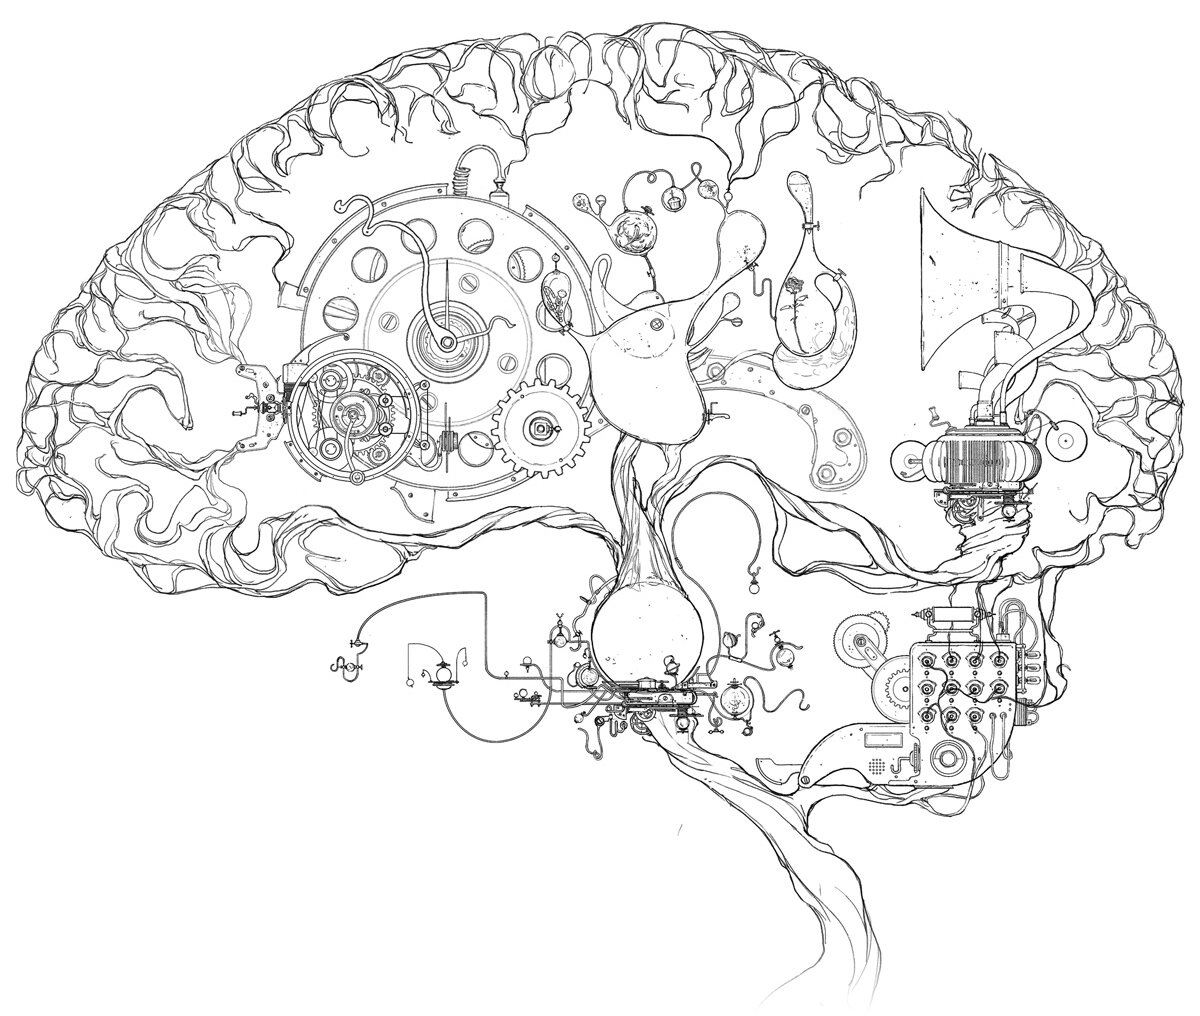 Sketch of the Brain